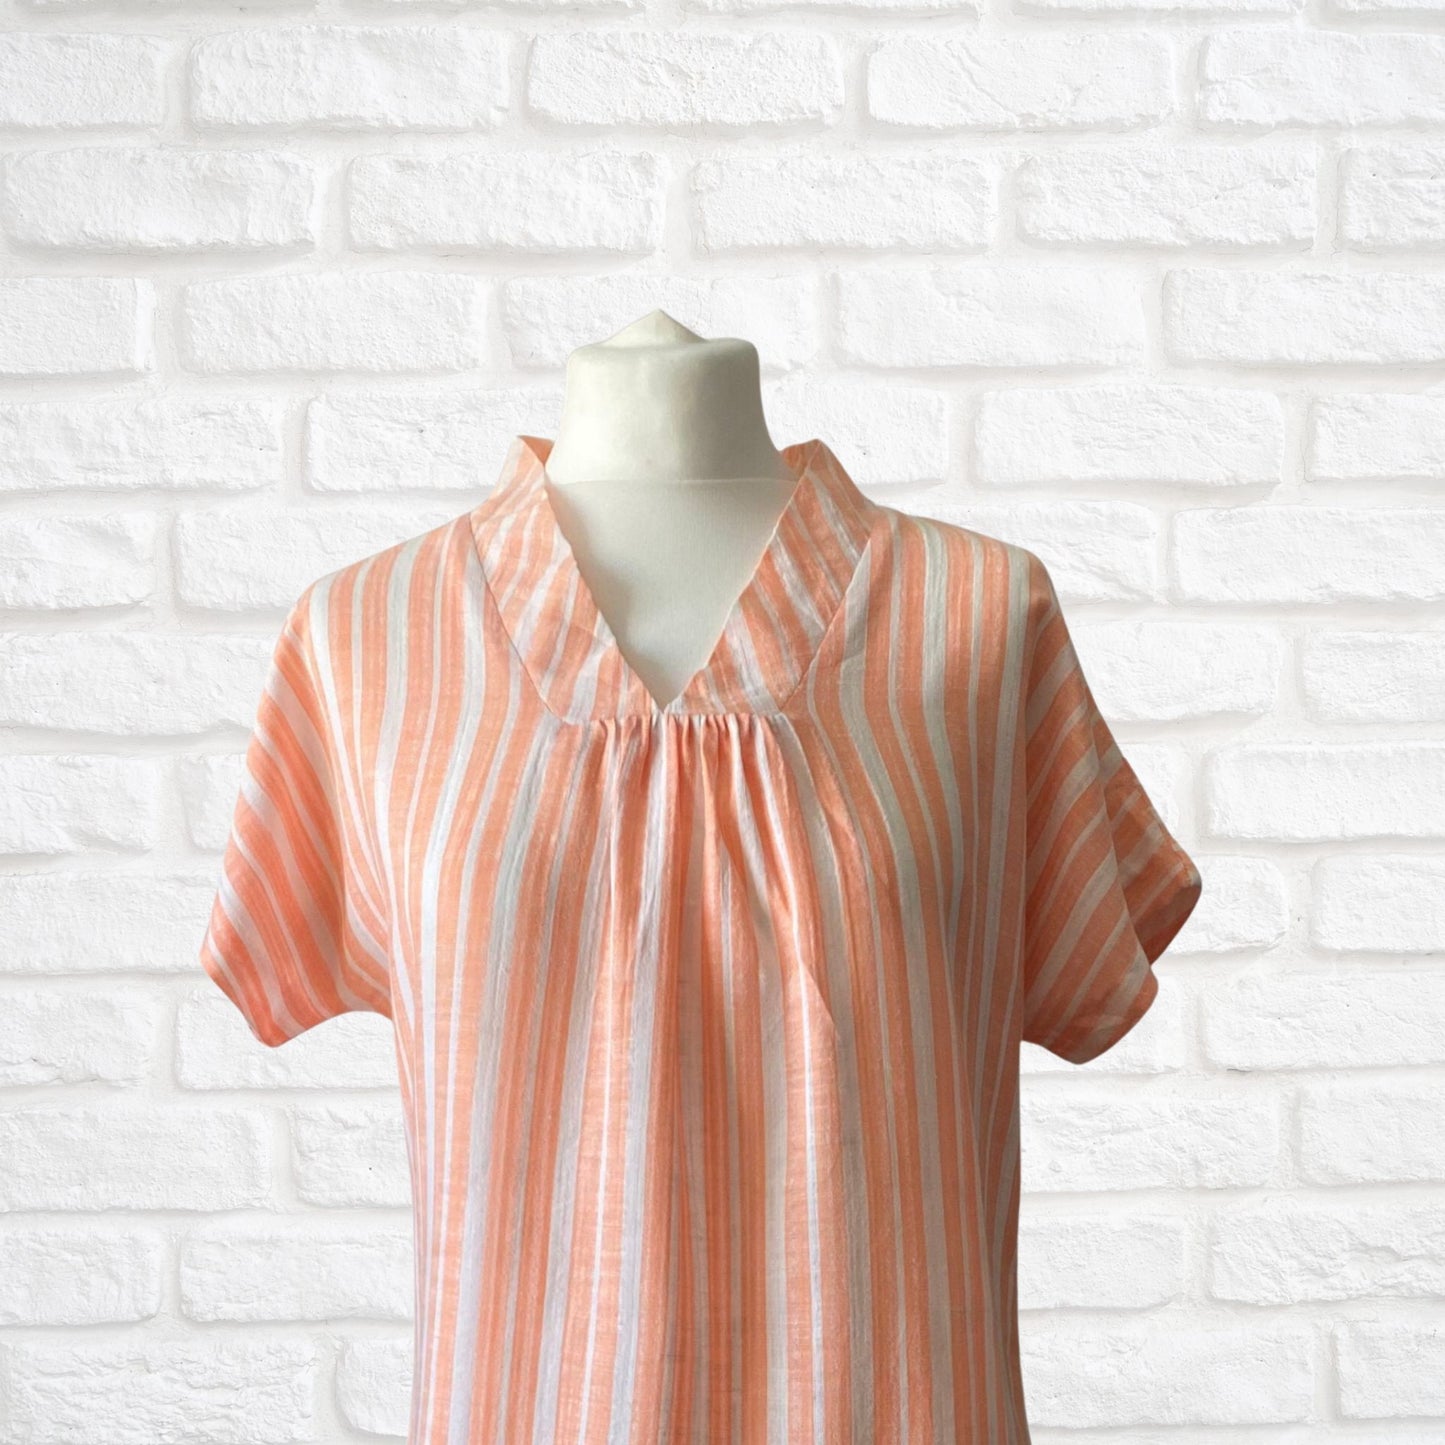 60s peach and white striped top by Jantzen Beachwear.   Approx  UK  size 12-16